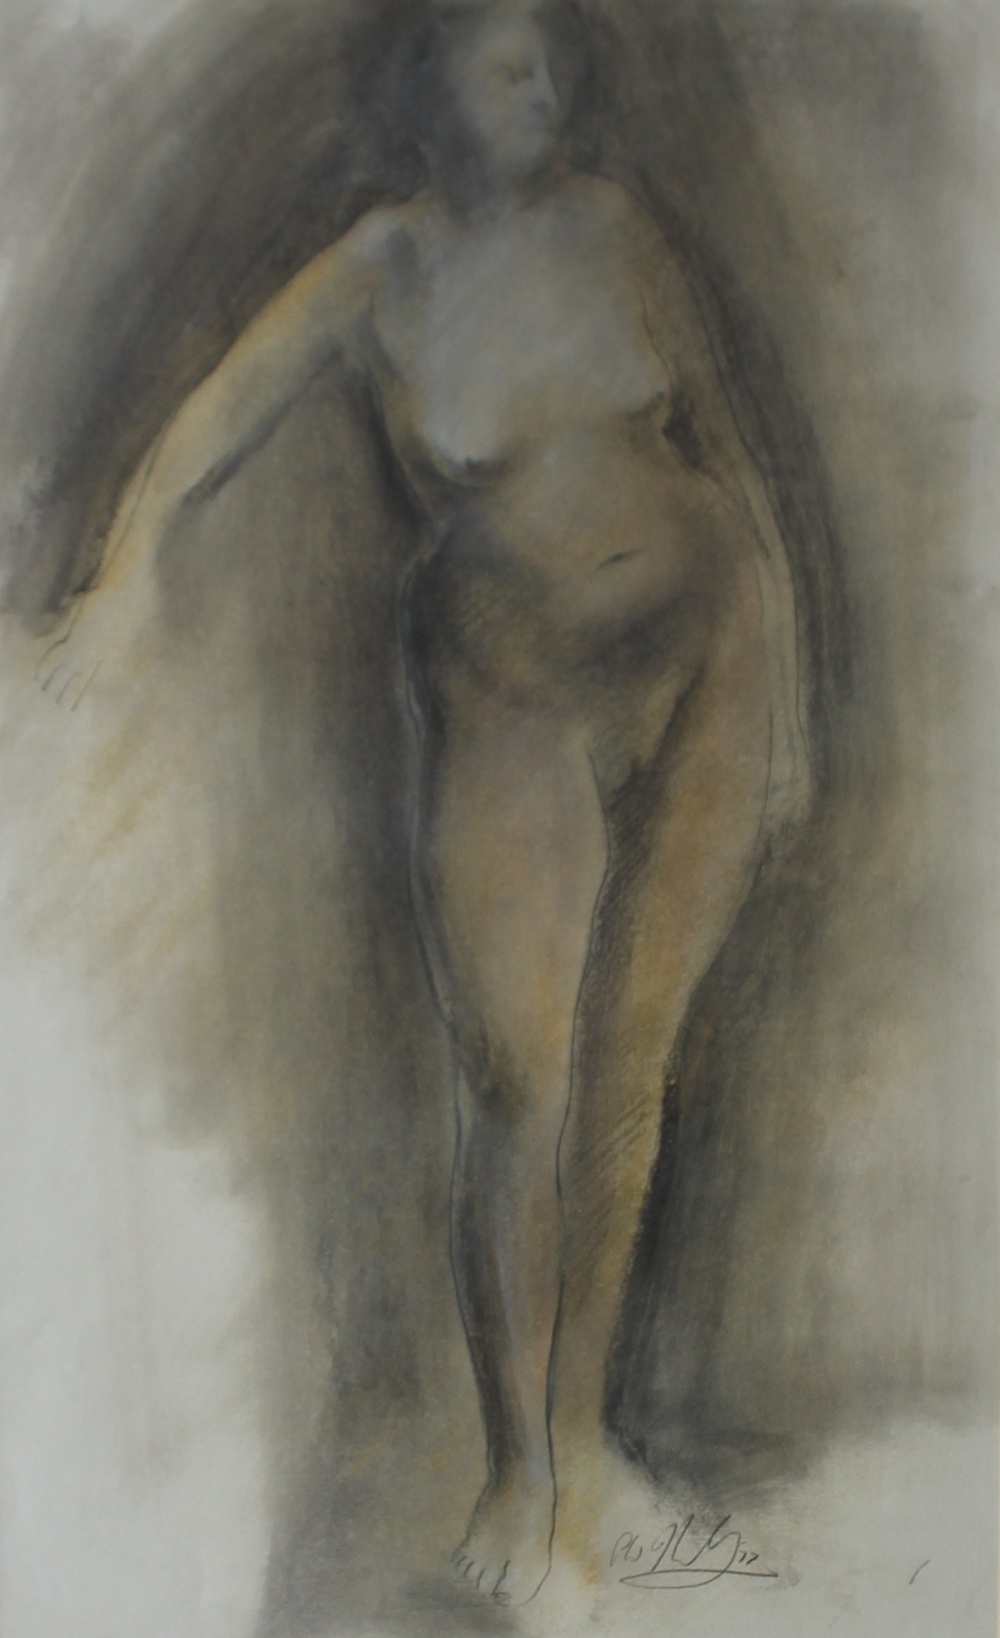 Peter William Nicholas
Nude study
Watercolour
Initialled and dated '77
56 x 34cm

***ARTISTS